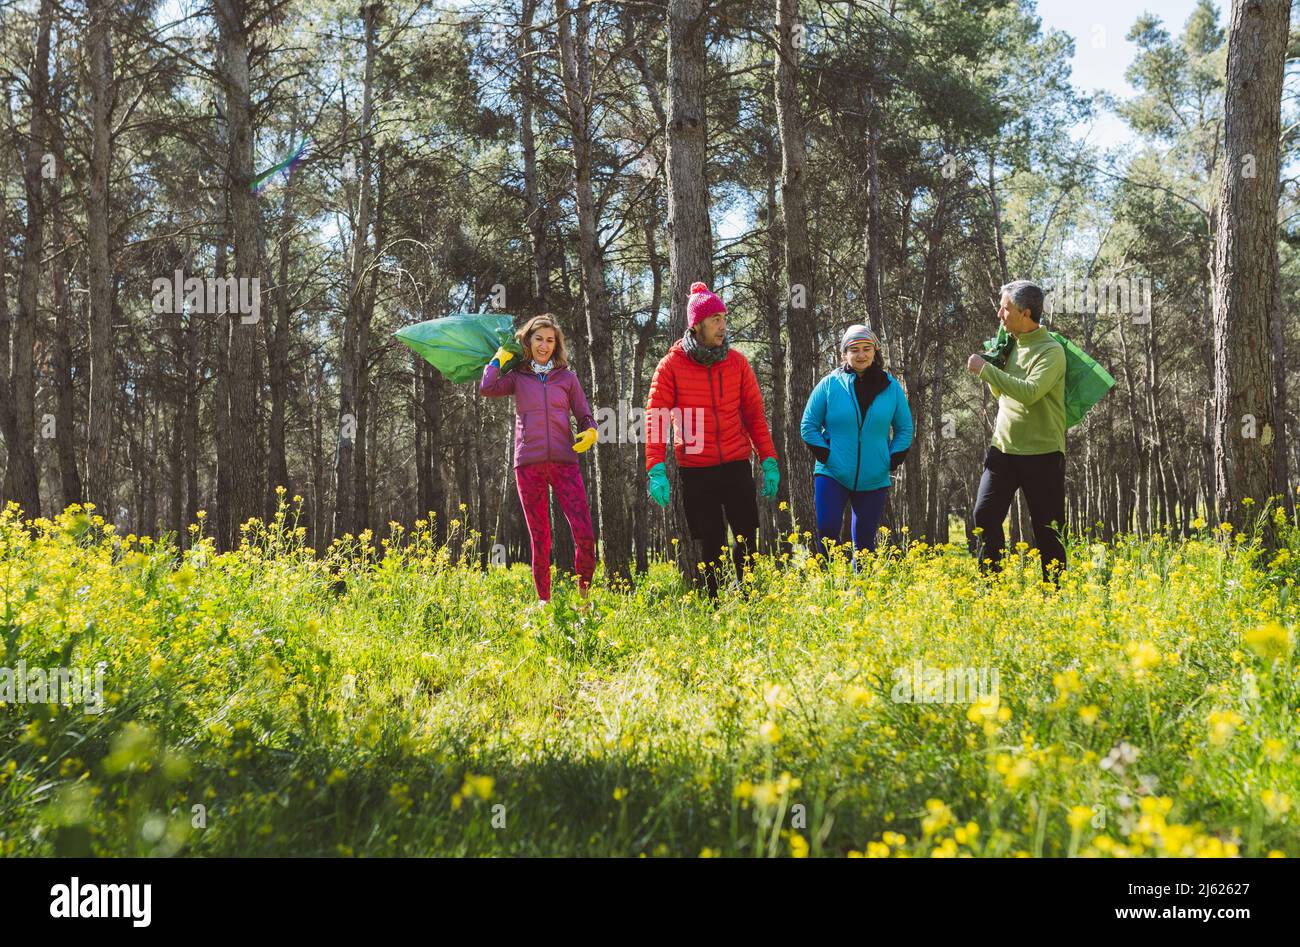 Volunteers with garbage bags walking in forest on sunny day Stock Photo